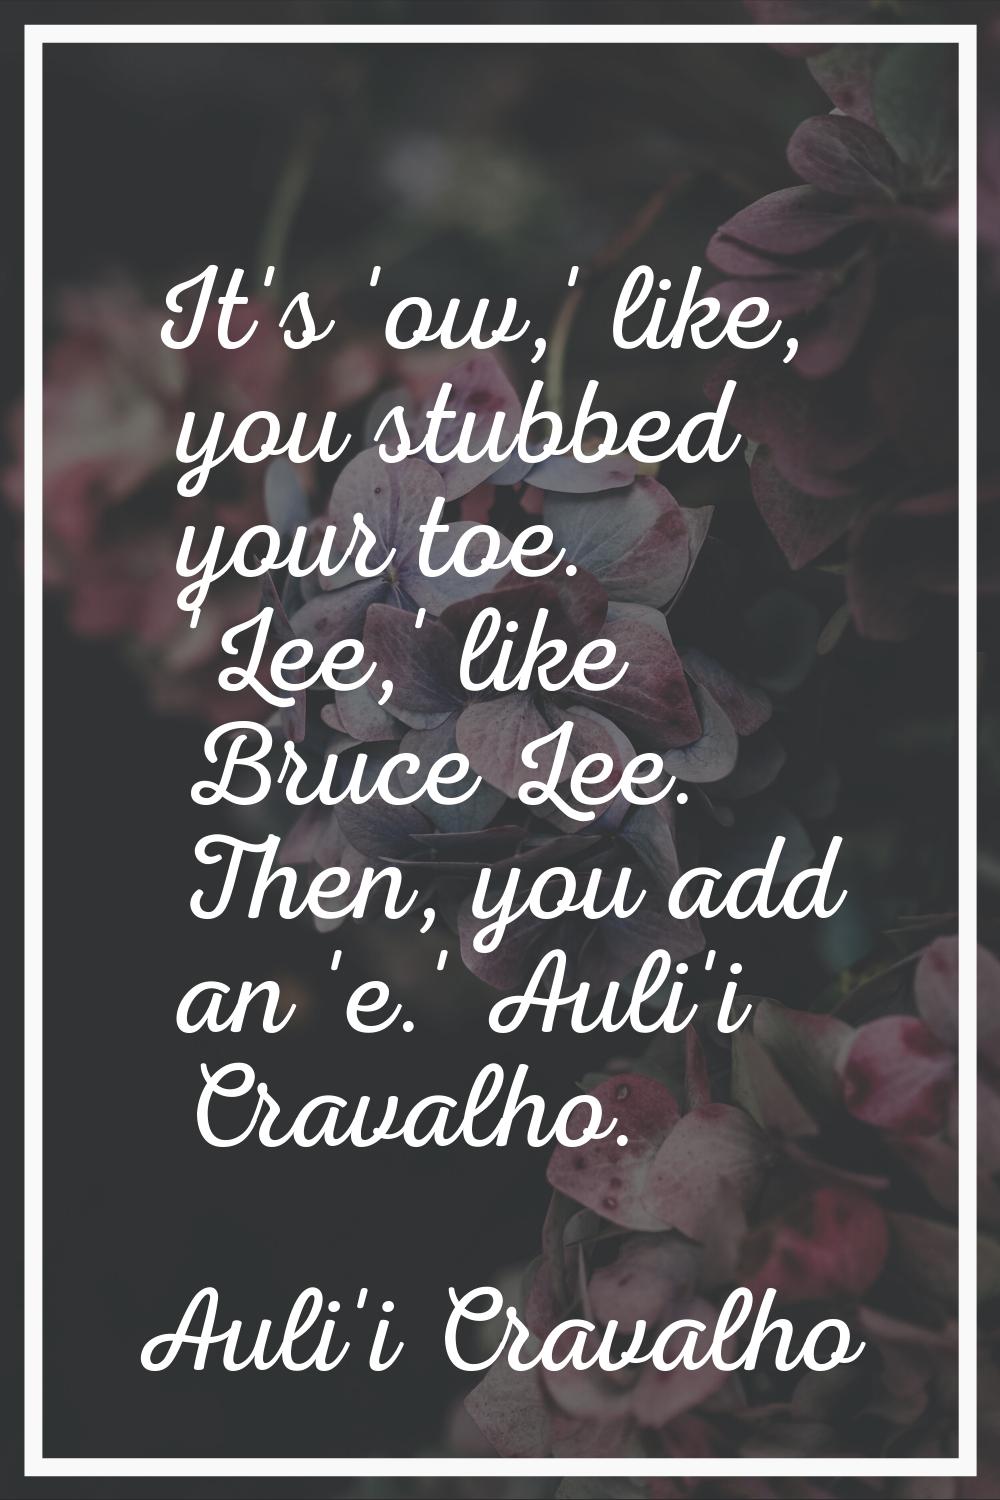 It's 'ow,' like, you stubbed your toe. 'Lee,' like Bruce Lee. Then, you add an 'e.' Auli'i Cravalho